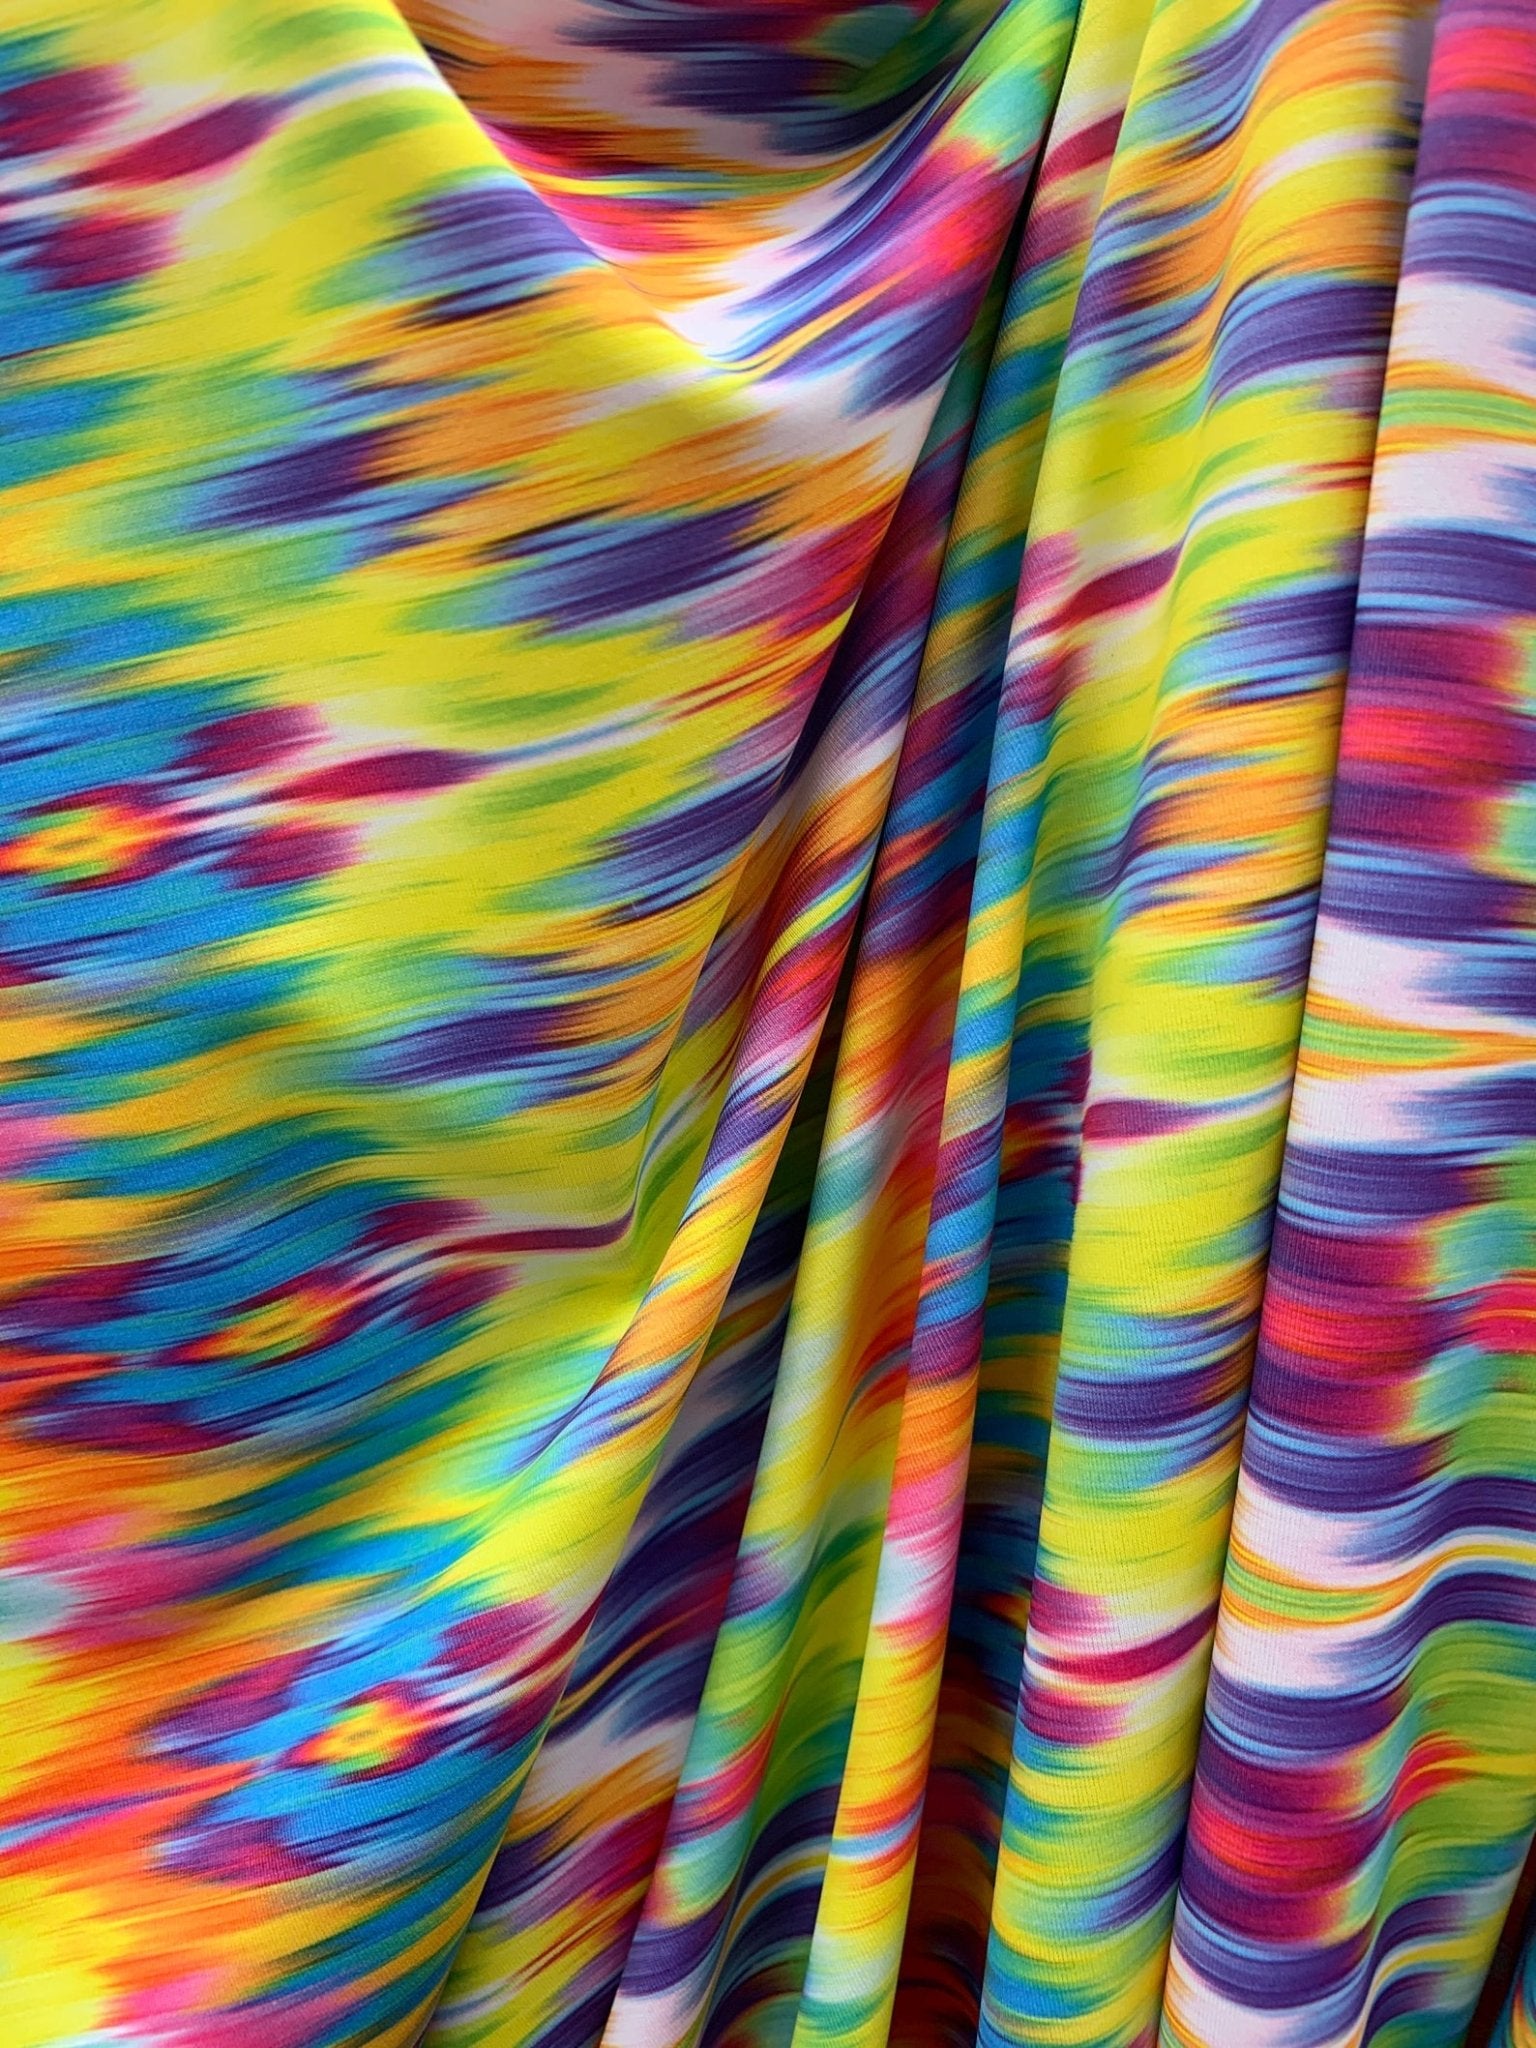 Poly Spandex Tie Dye Abstract Swimsuit Print Fabric By The YardSpandex FabricICEFABRICICE FABRICSPoly Spandex Tie Dye Abstract Swimsuit Print Fabric By The Yard ICEFABRIC